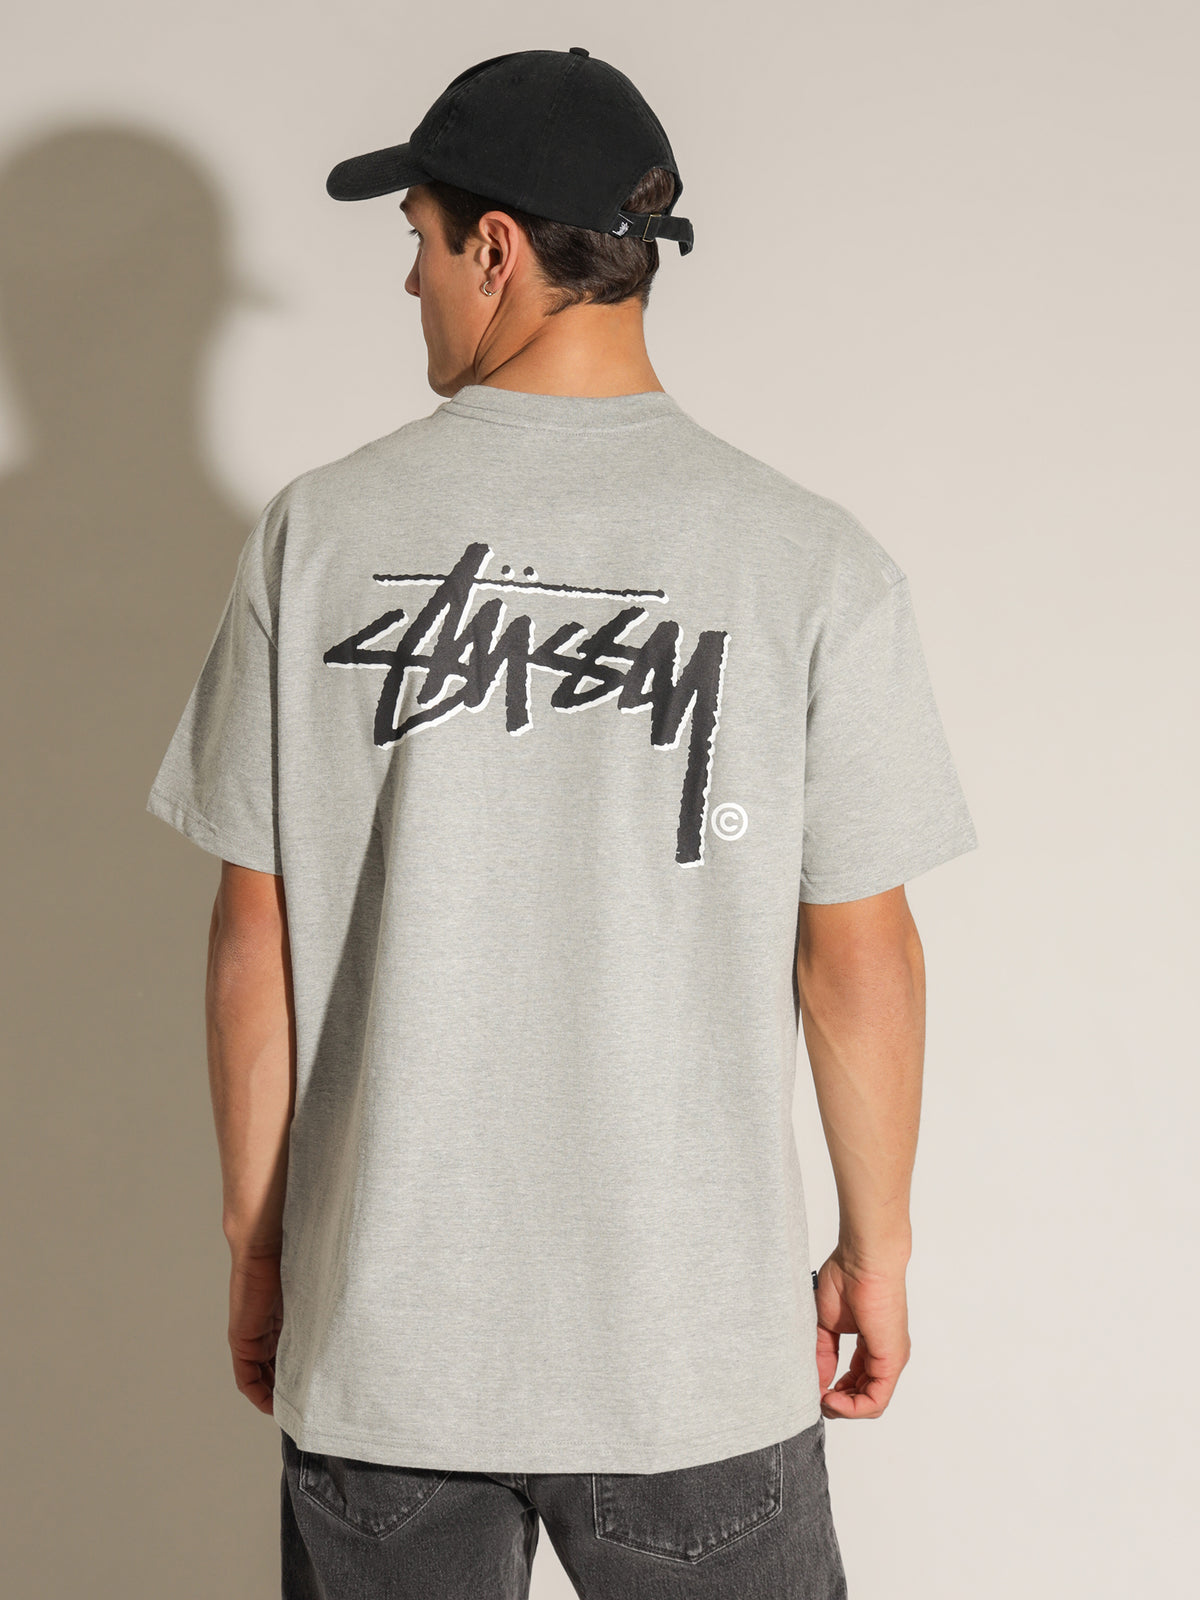 Solid Shadow Stock T-Shirt in True Grey